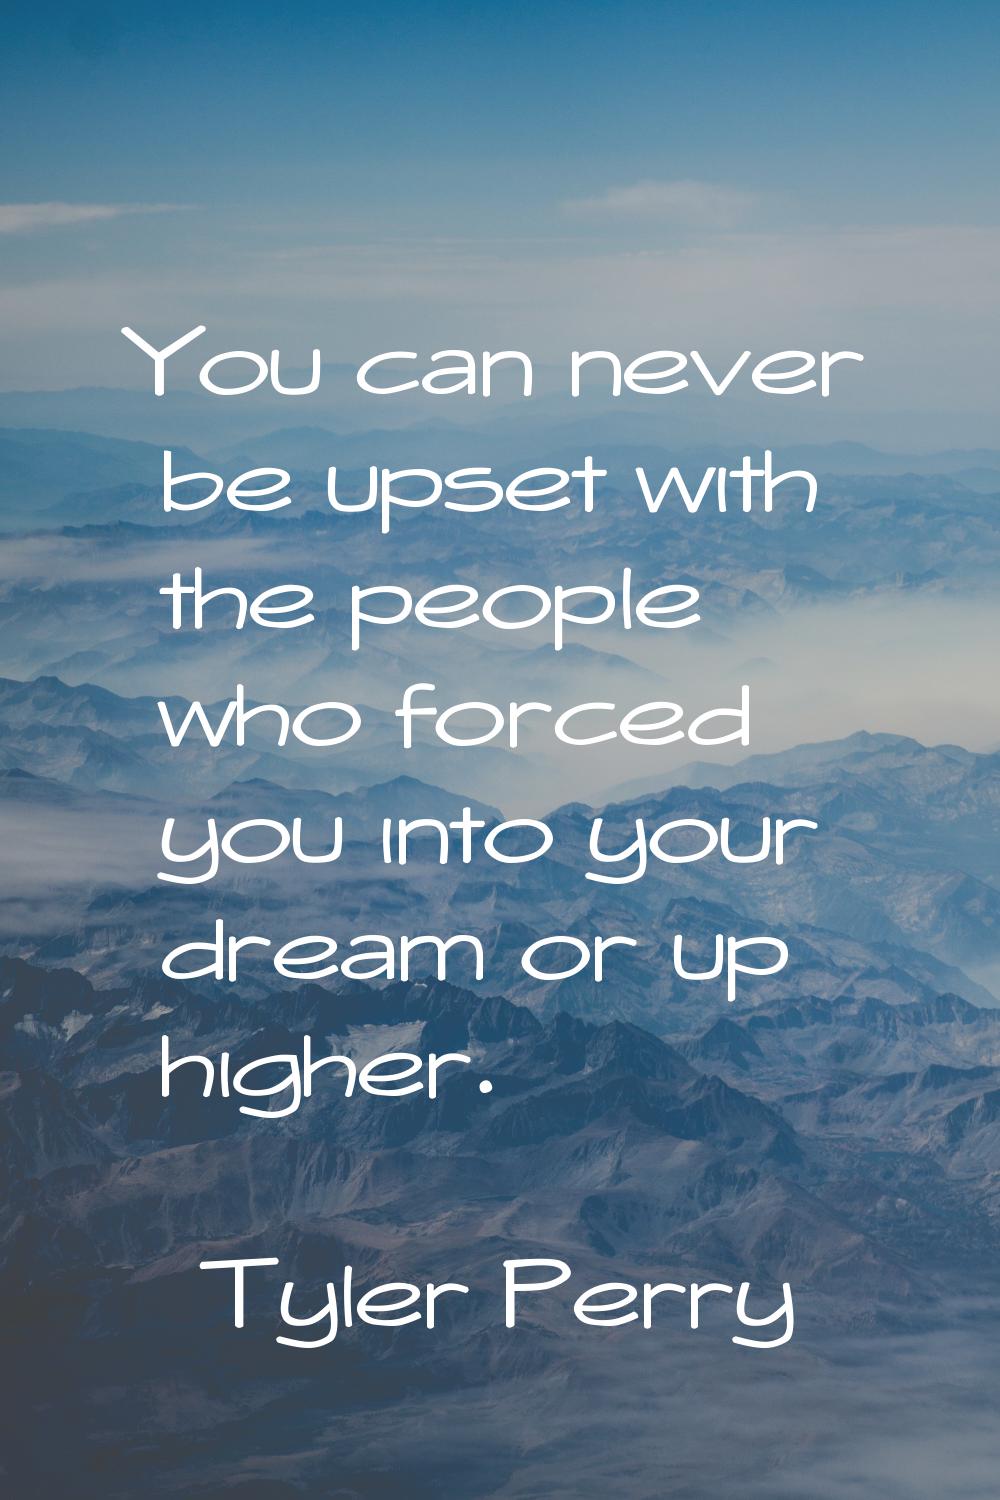 You can never be upset with the people who forced you into your dream or up higher.